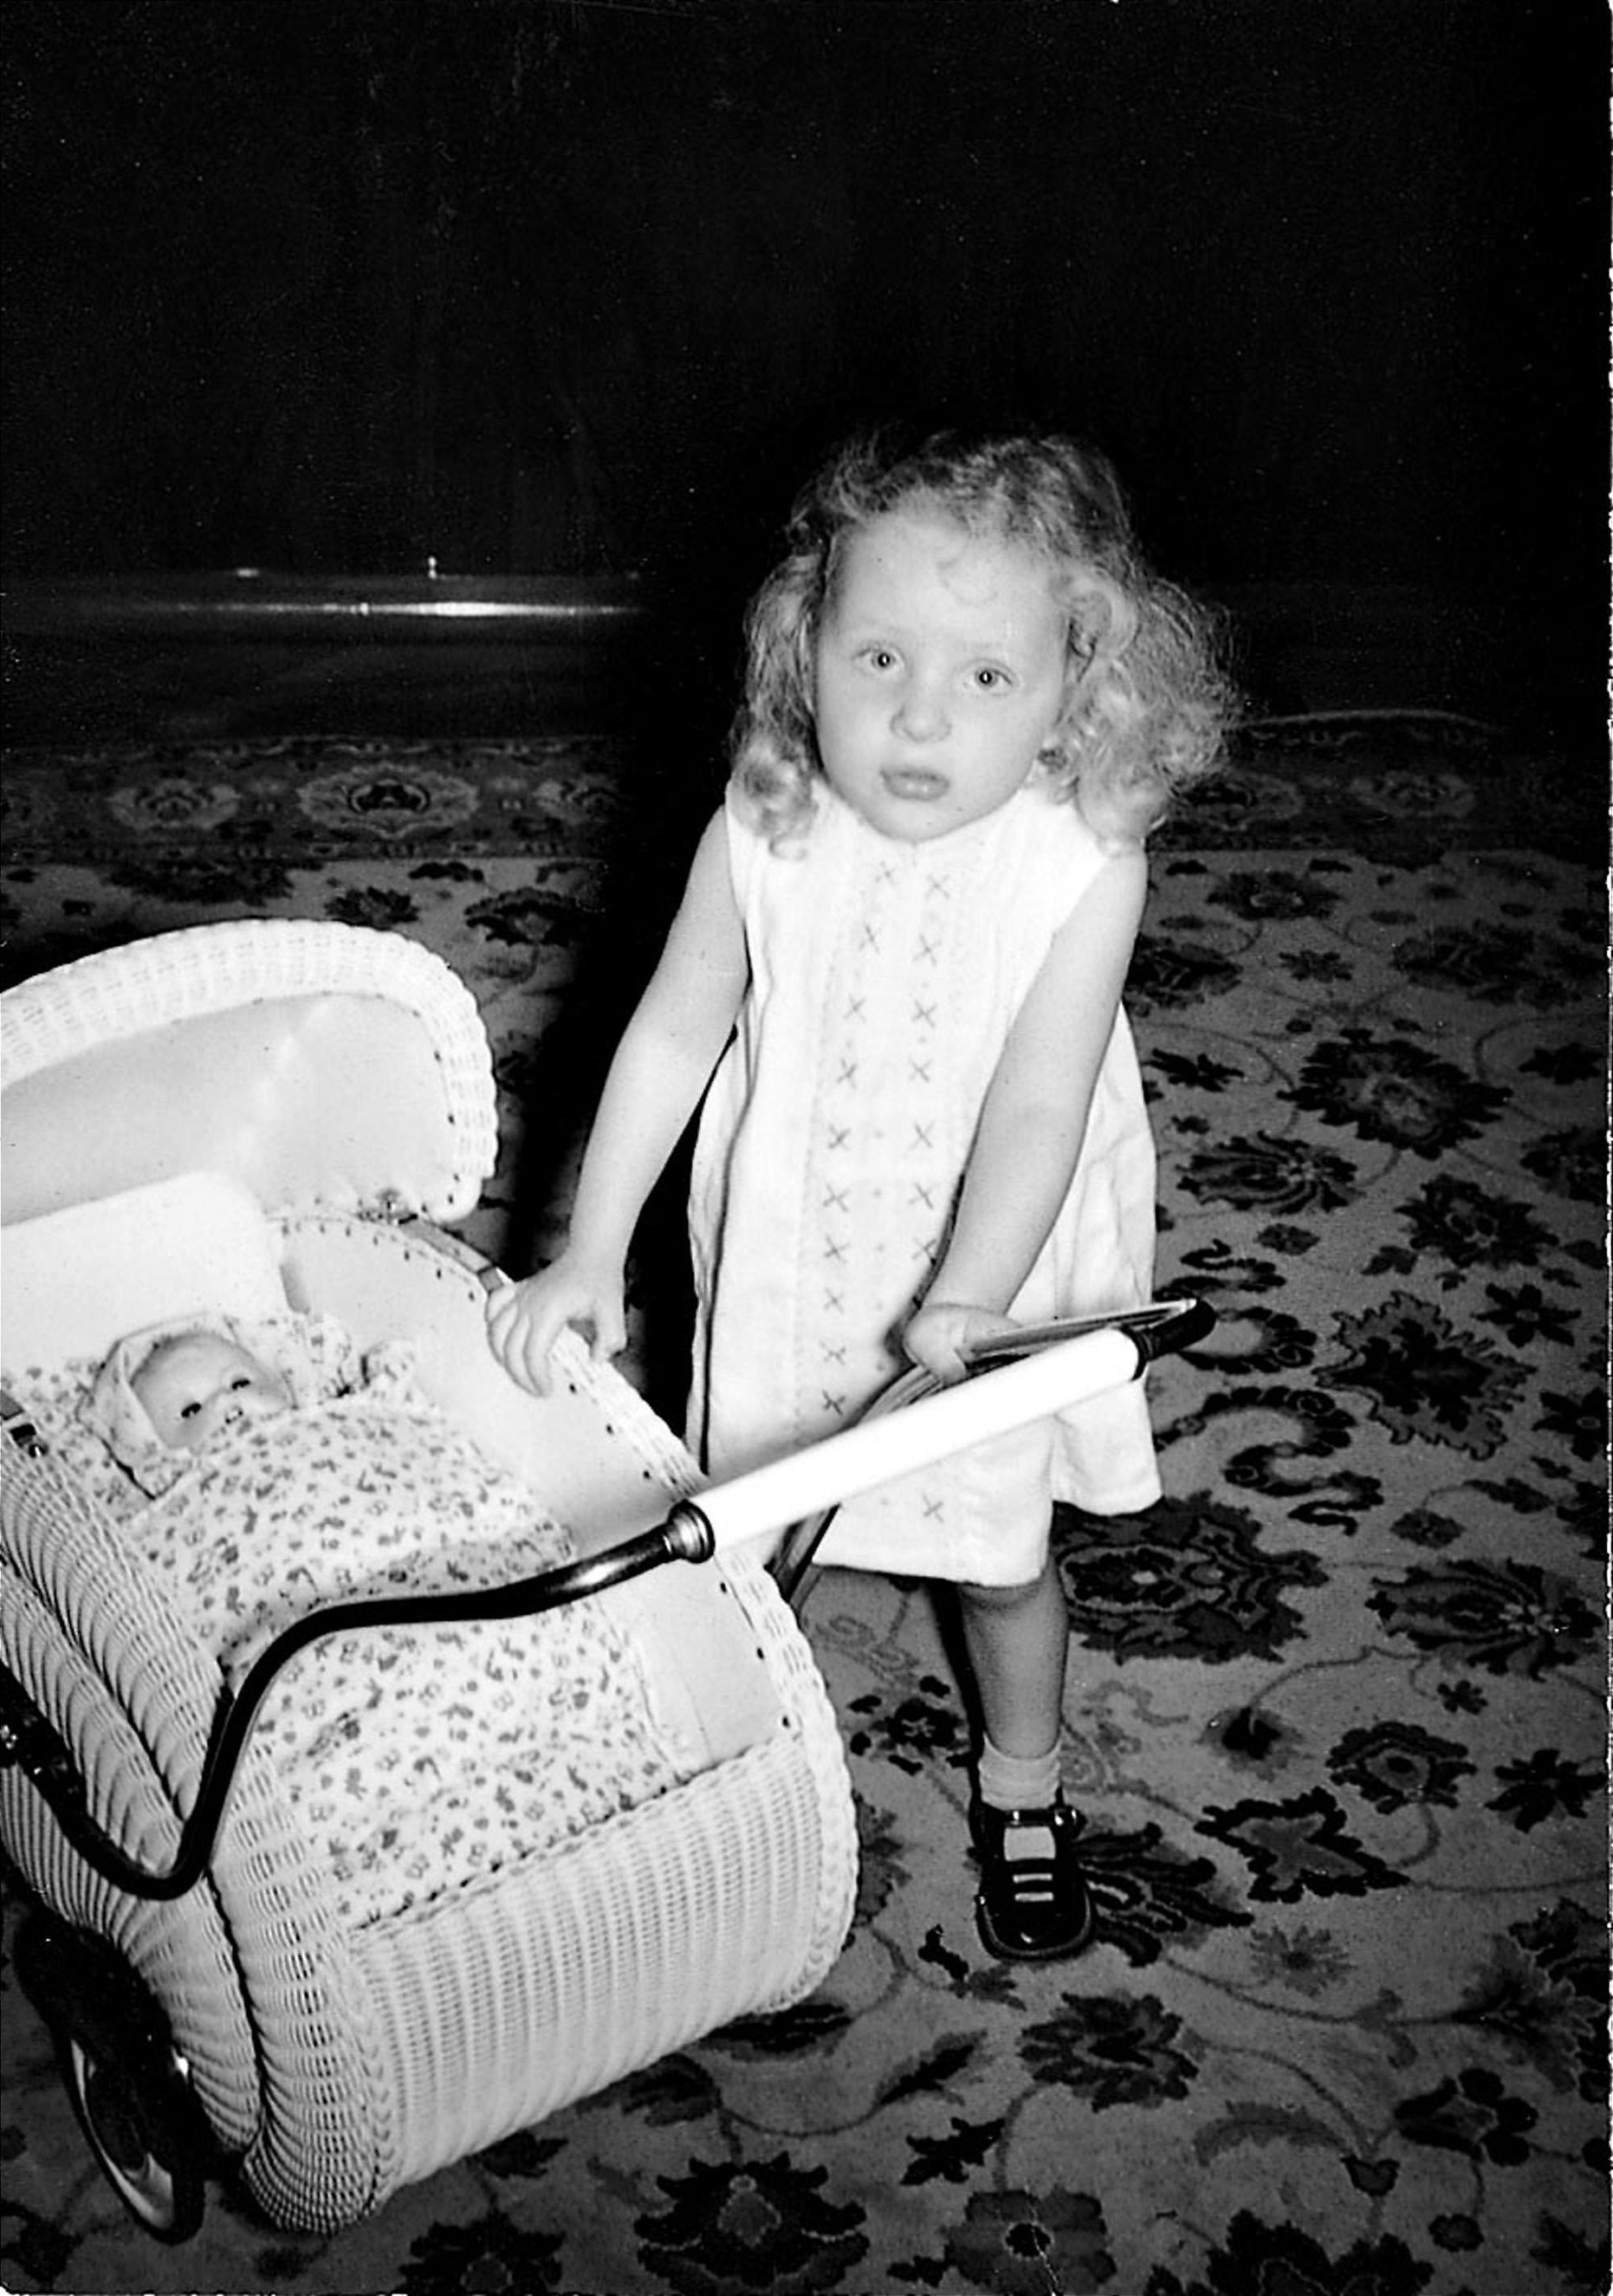 Merkel as a child with a toy stroller.